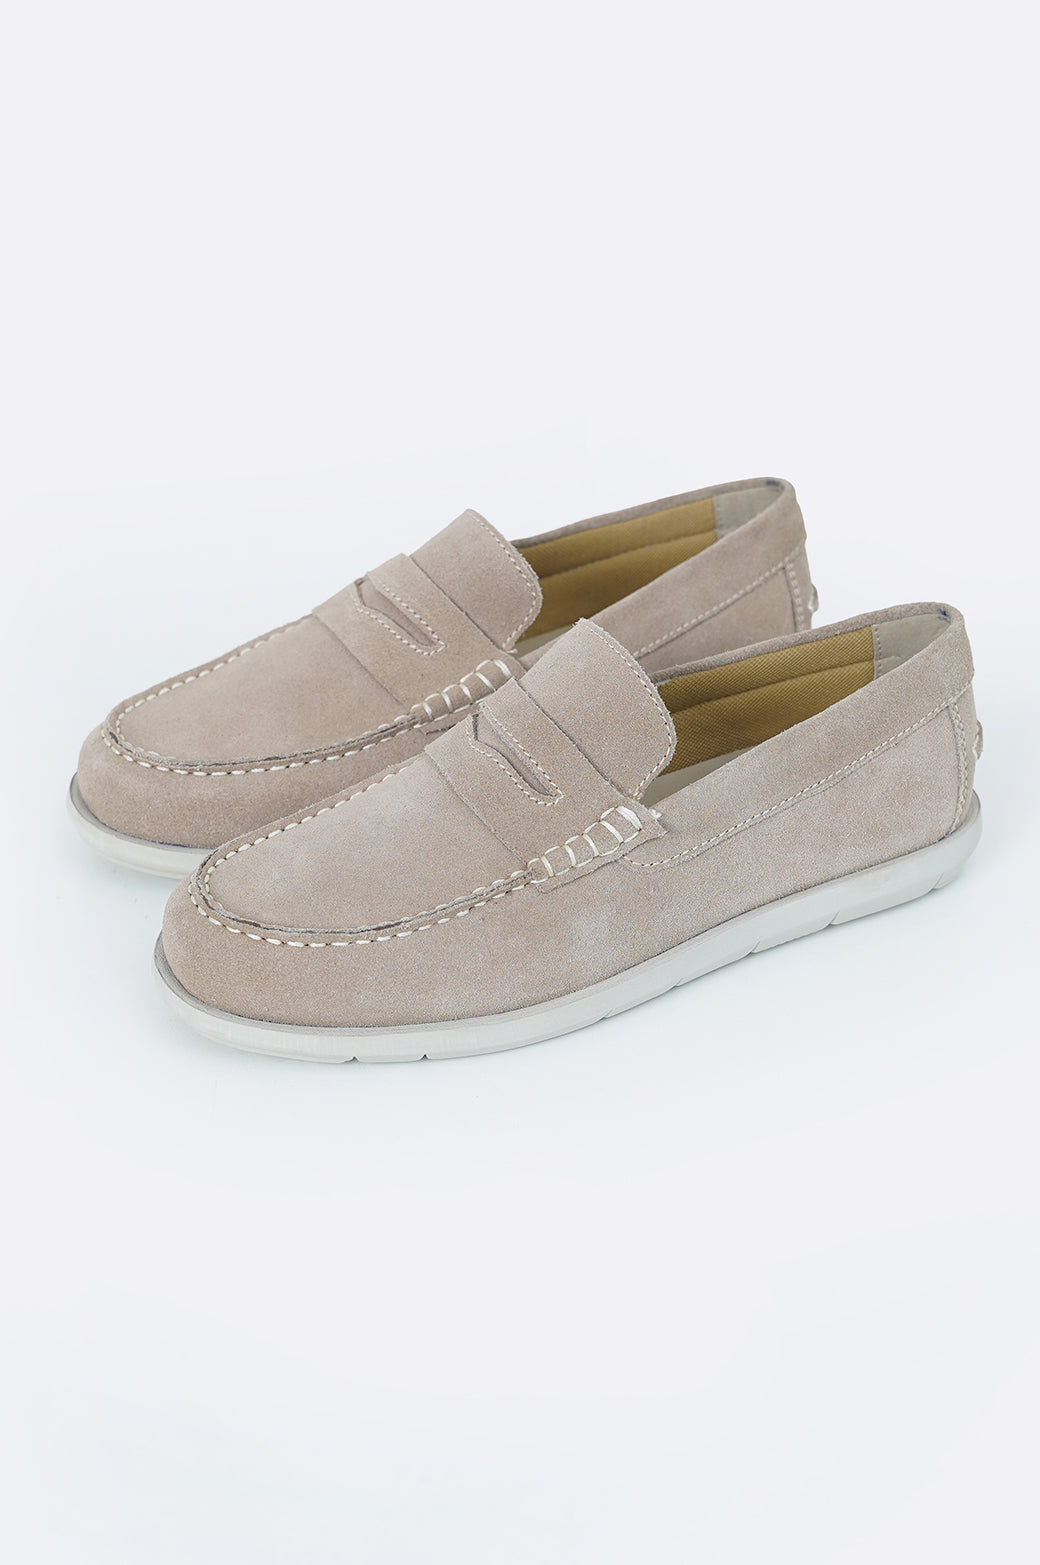 SAND LIGHTWEIGHT SUEDE LOAFERS